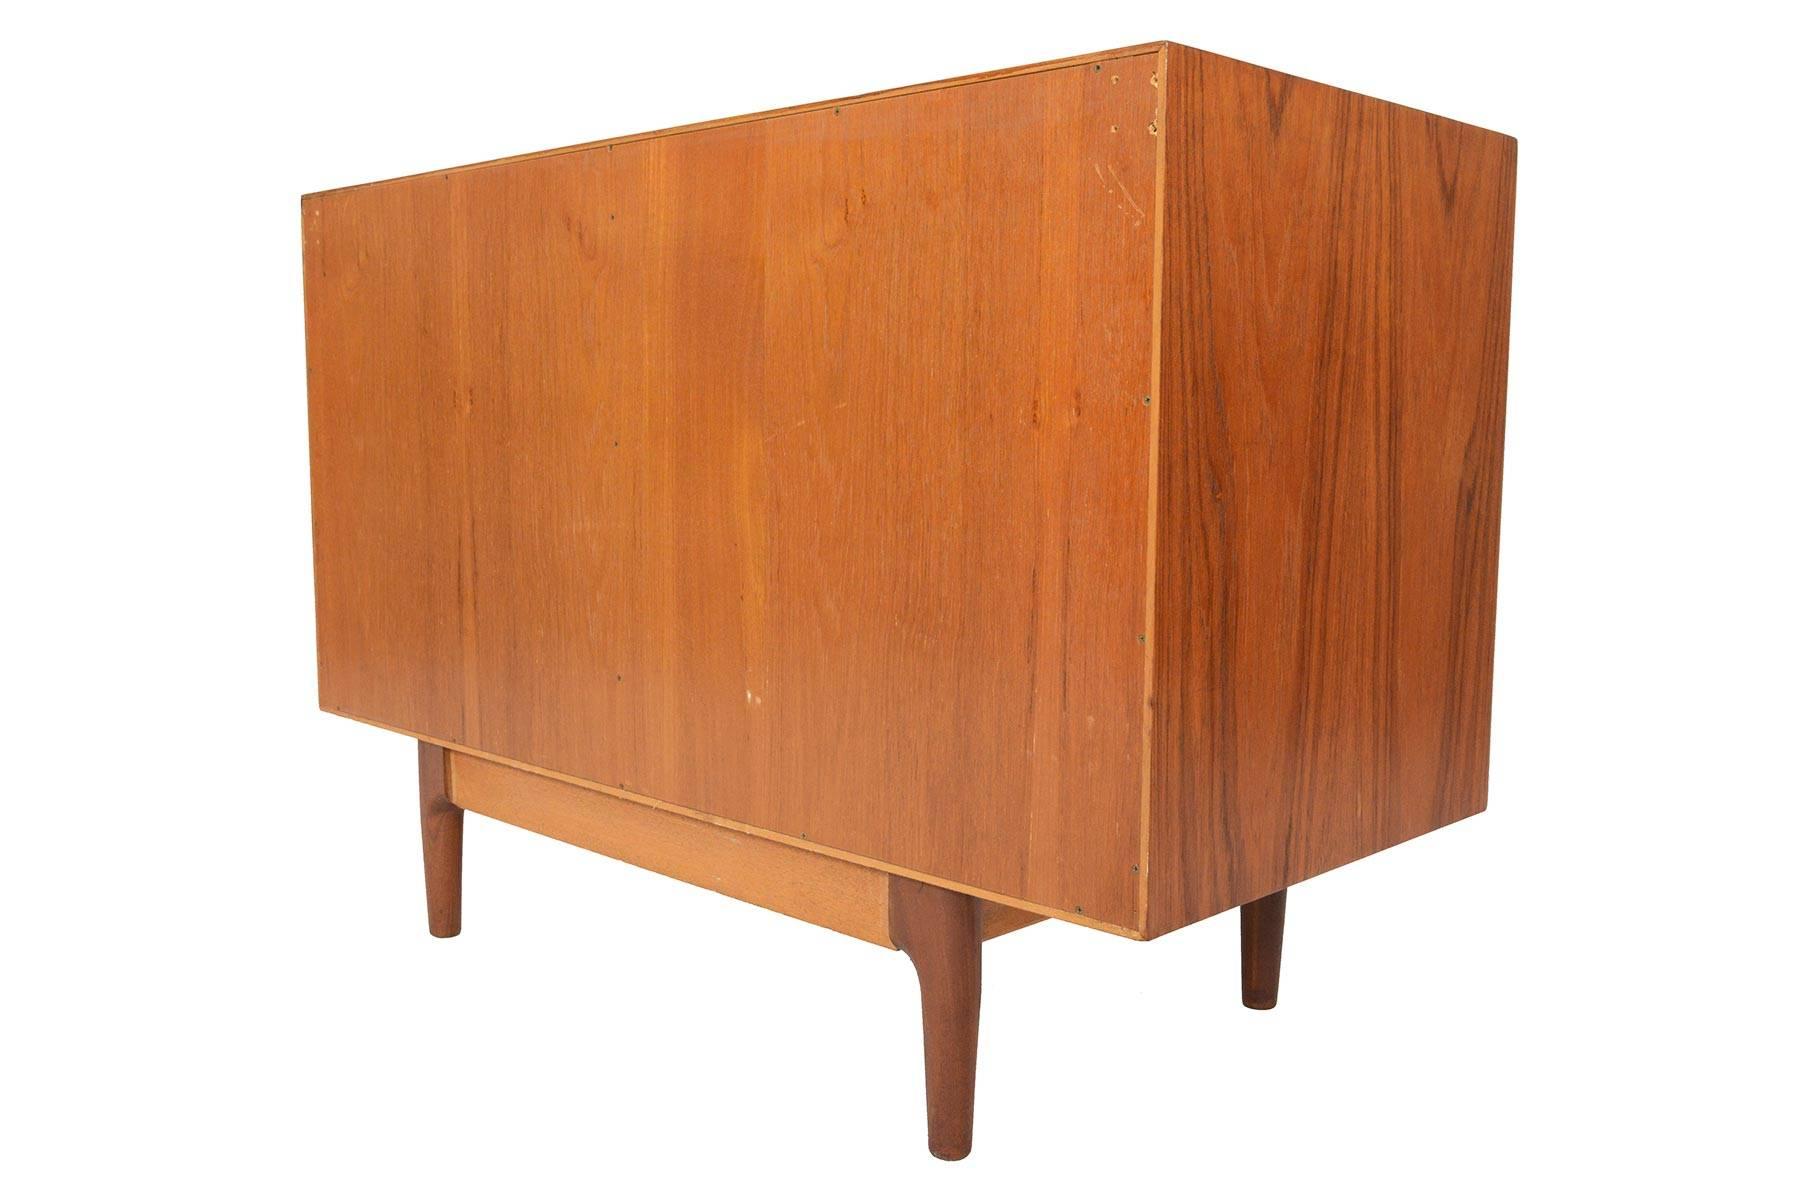 Small Refinished Teak Credenza by Ib Kofod-Larsen for G-Plan #4 3